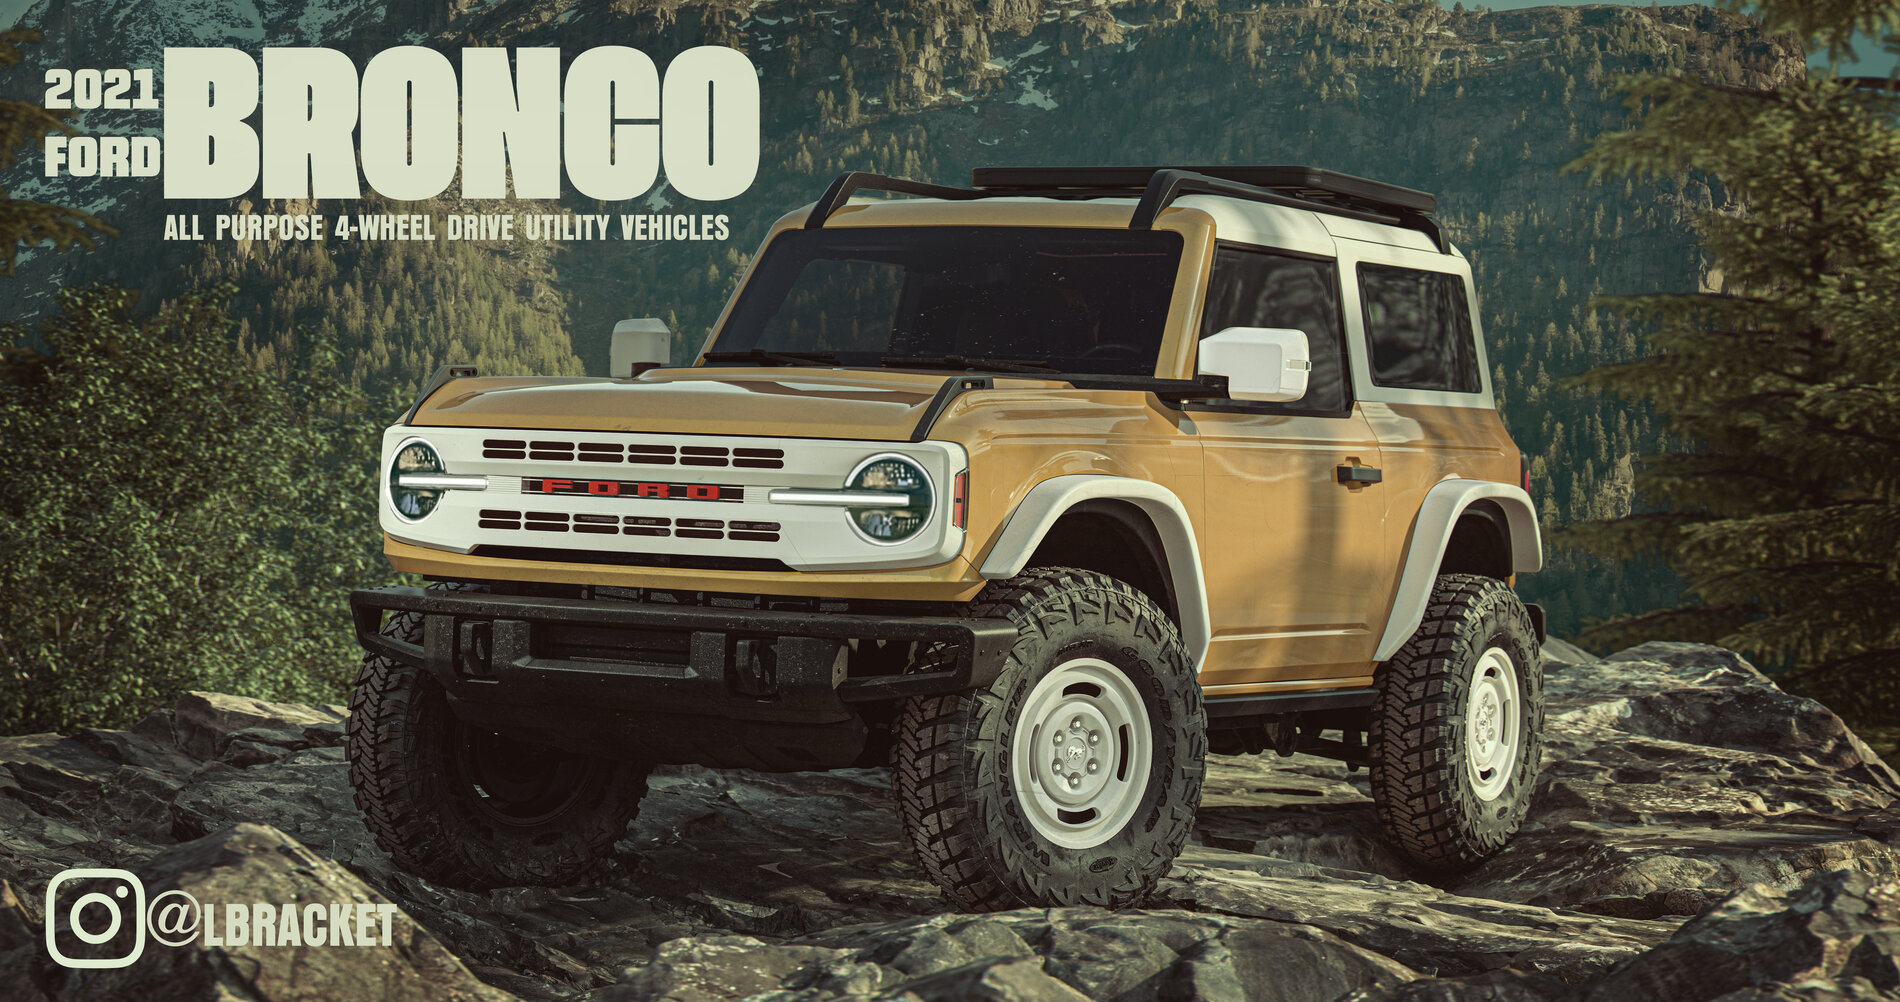 Ford Bronco 2022 Ford Bronco Heritage Edition - A Closer Look (Dedicated Thread for All Things Heritage) brian-ellebracht-vintagelook-yellowstone-camera2'